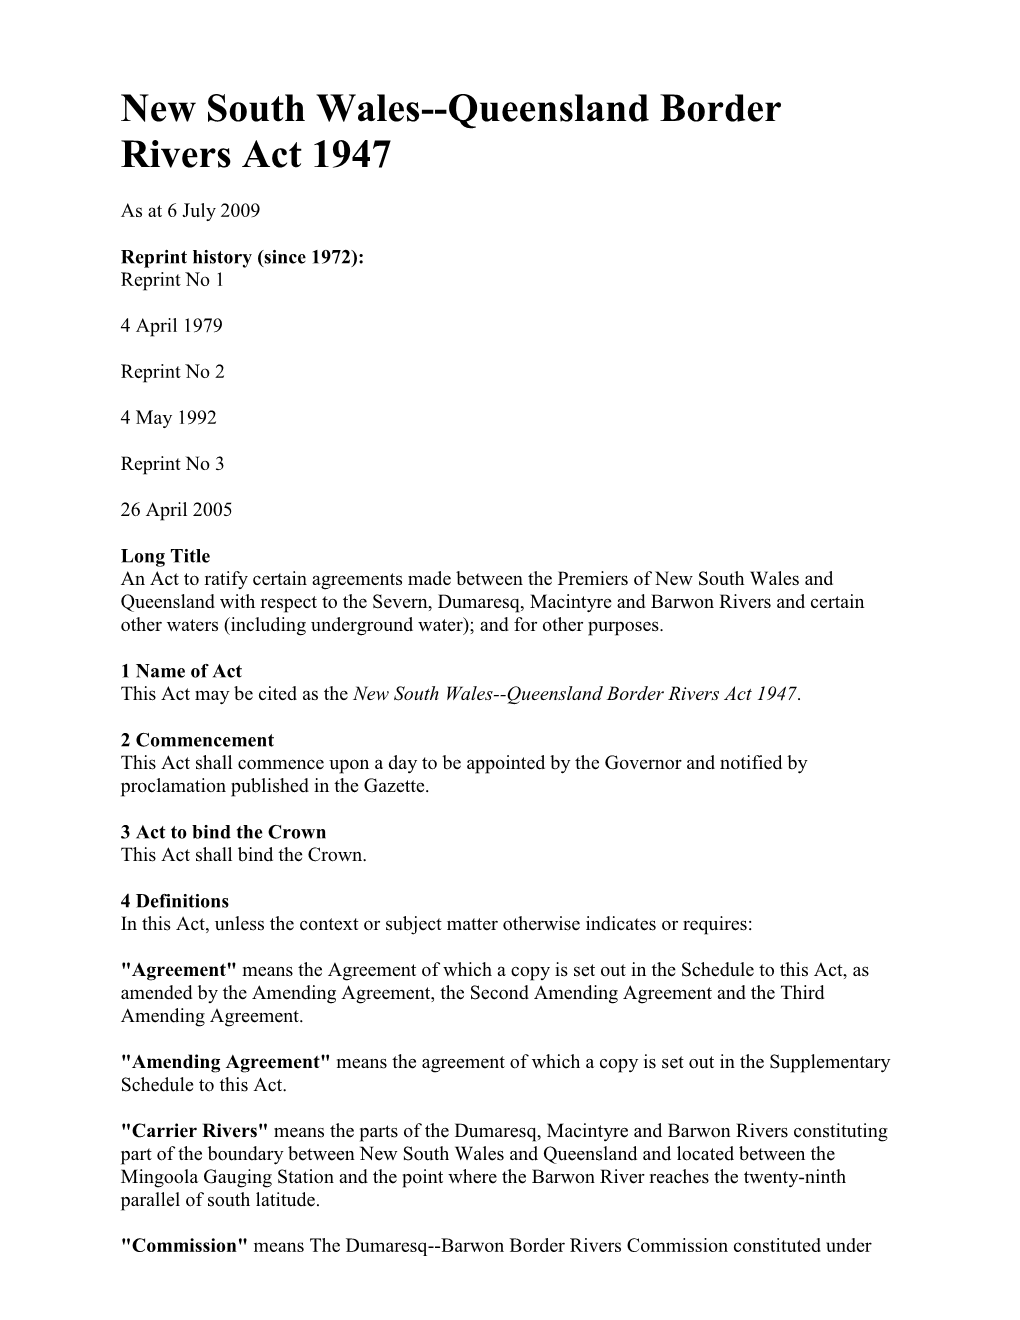 New South Wales--Queensland Border Rivers Act 1947